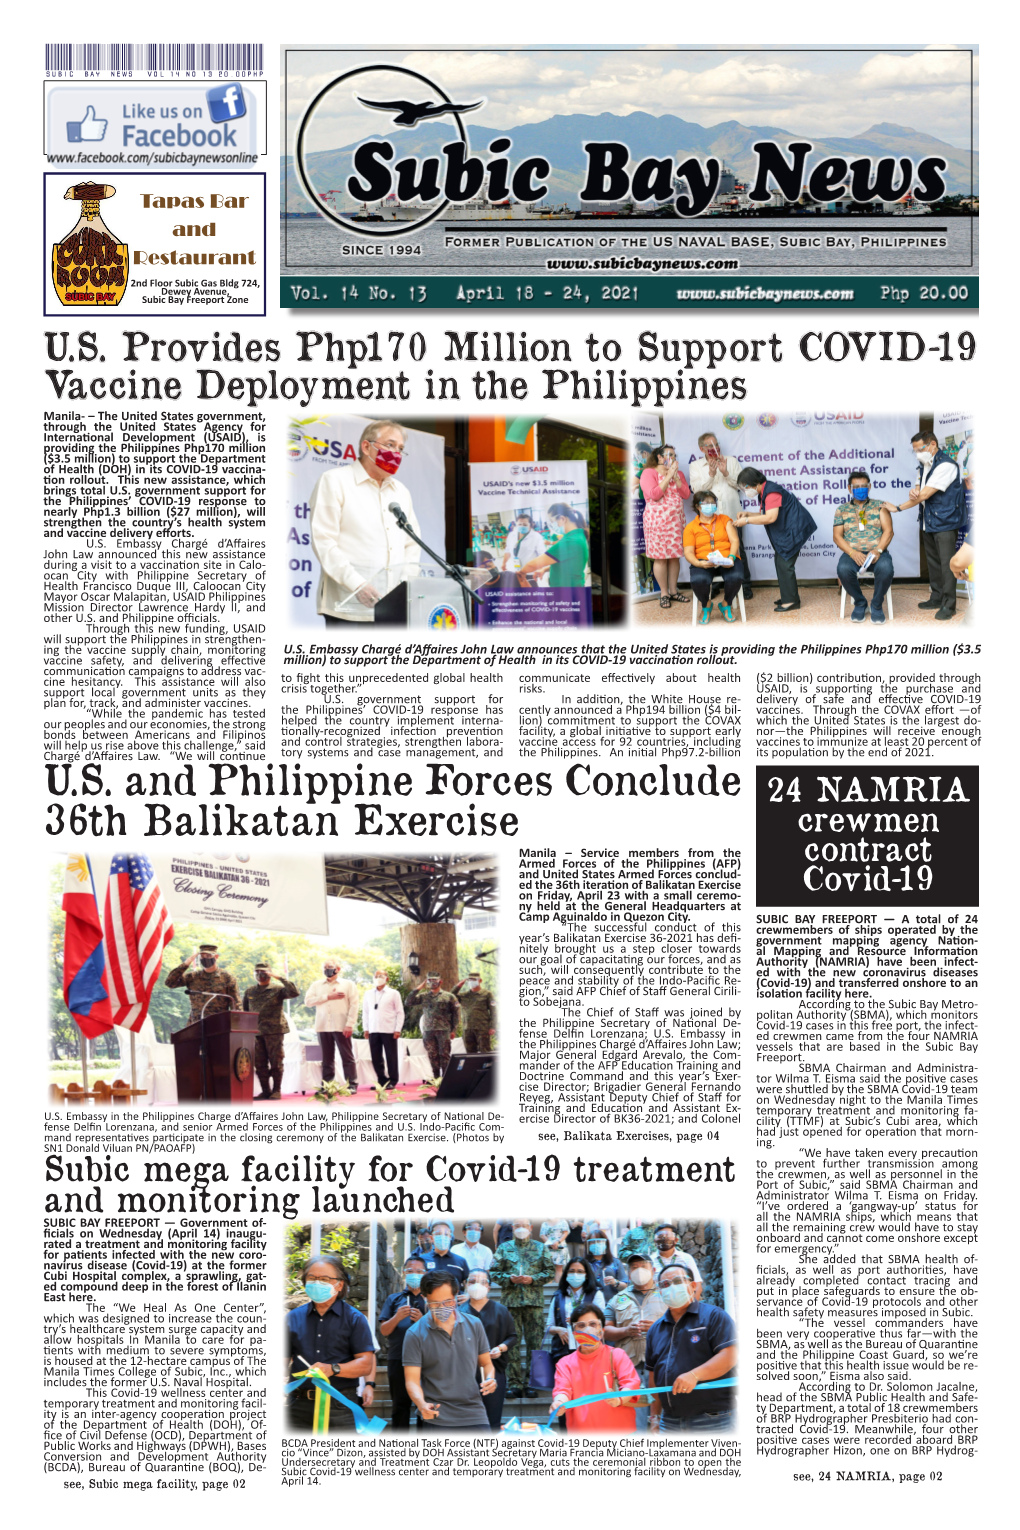 US and Philippine Forces Conclude 36Th Balikatan